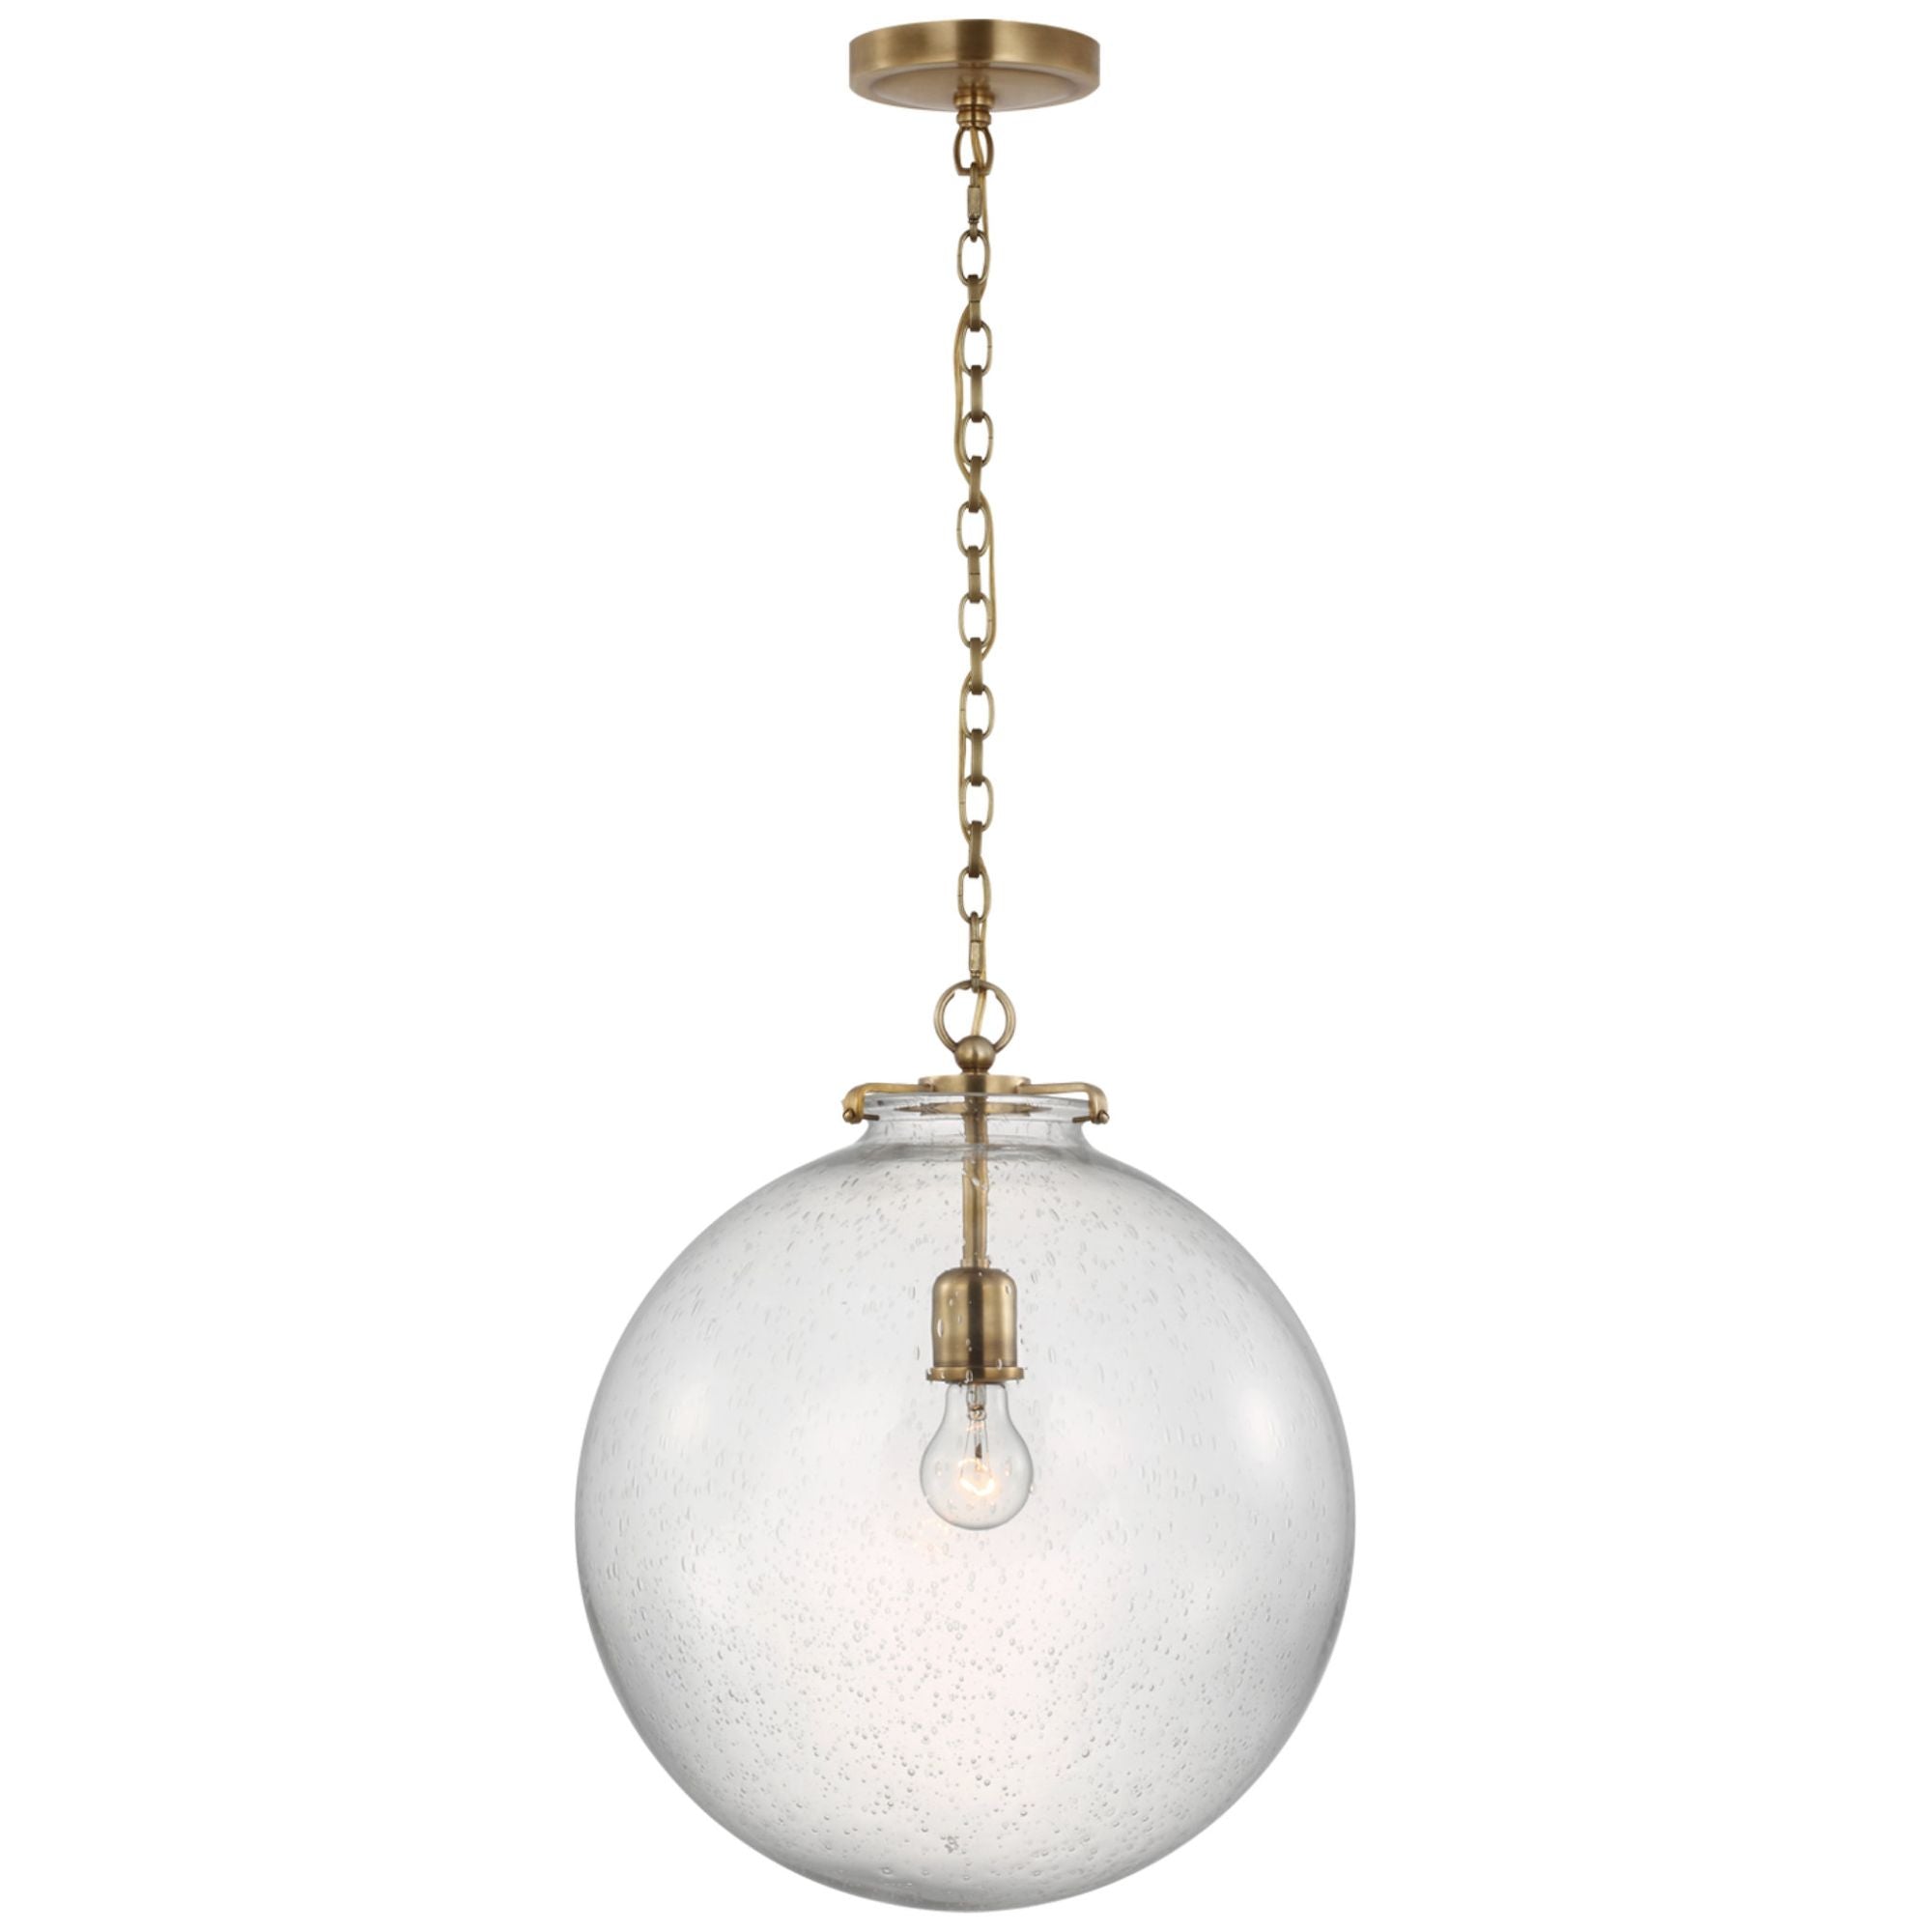 Thomas O'Brien Katie Large Globe Pendant in Hand-Rubbed Antique Brass with Seeded Glass